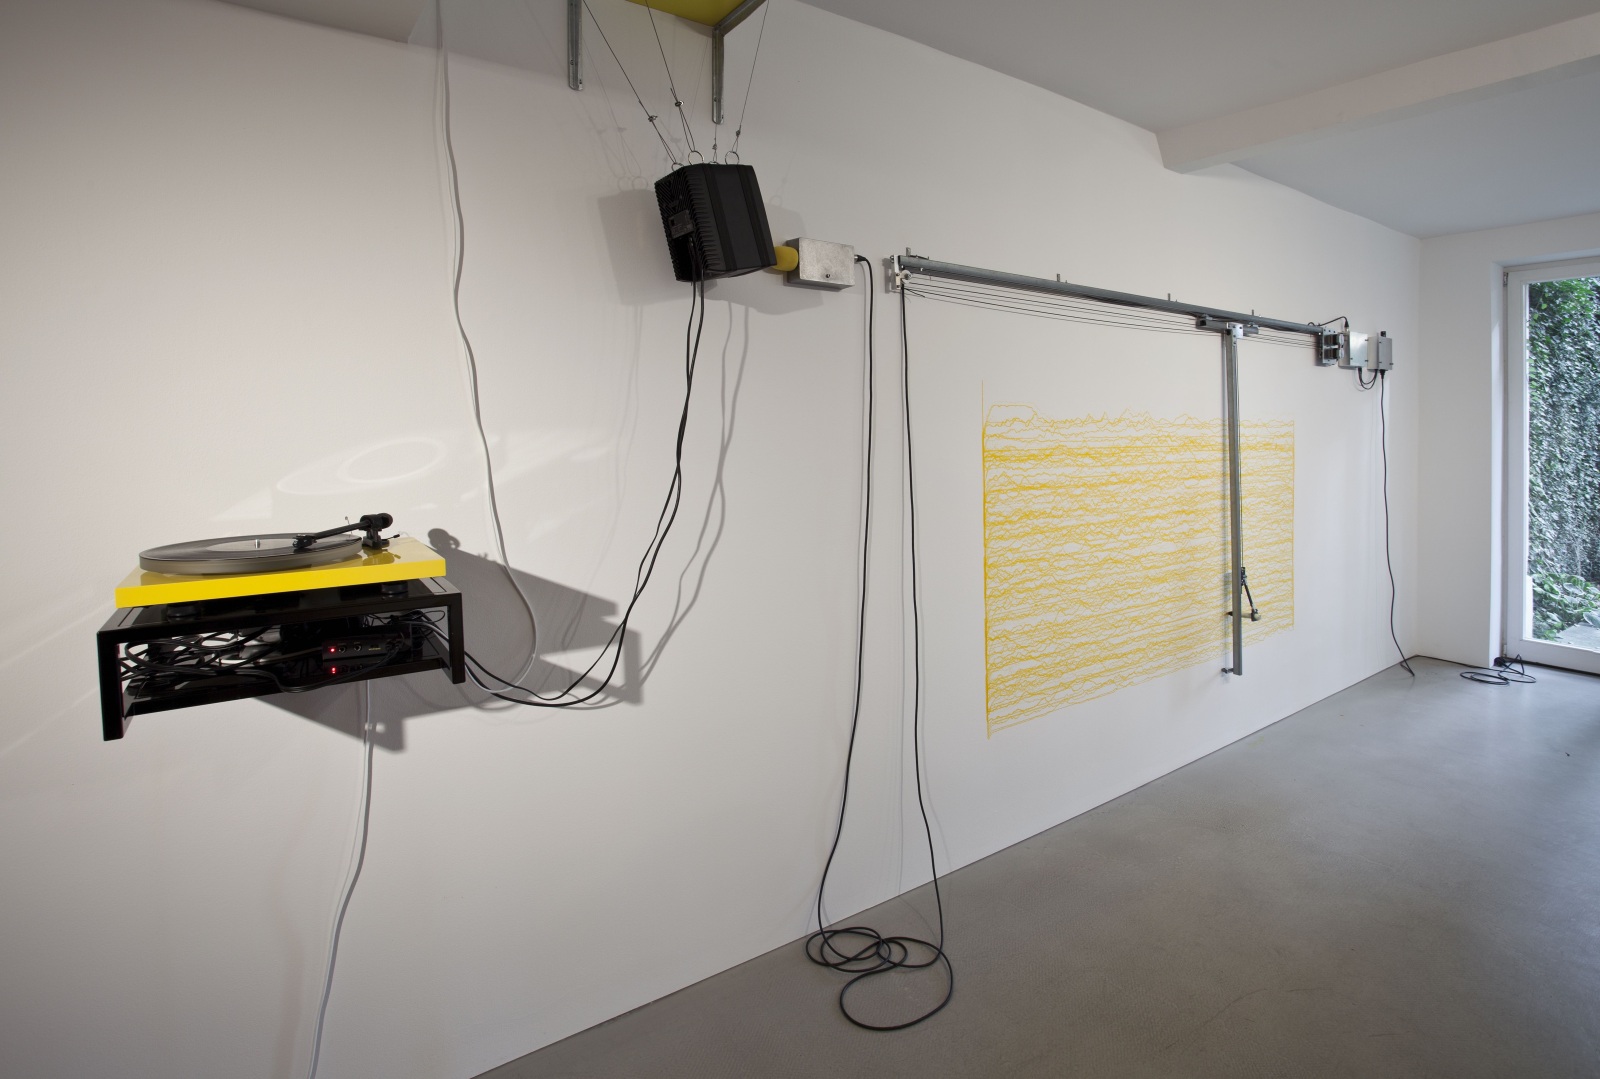 <div class="image_caption_container"><div class="image_caption"><p class="image_caption"><span>Angela Bulloch, </span><span>Short Big Yellow Drawing Machine</span><span>, 2012, Drawing Machine, ink (yellow), wall mounted table, MP3 player or yellow record player, ABCDLP 002 record, pre amp, various cables, Genelec speaker, sound piece "Short Big Drama for YDM" by George van Dam, dimensions variable, Collection of the National Gallery of Victoria, Melbourne. Photo © Andrea Rossetti</span></p></div></div>